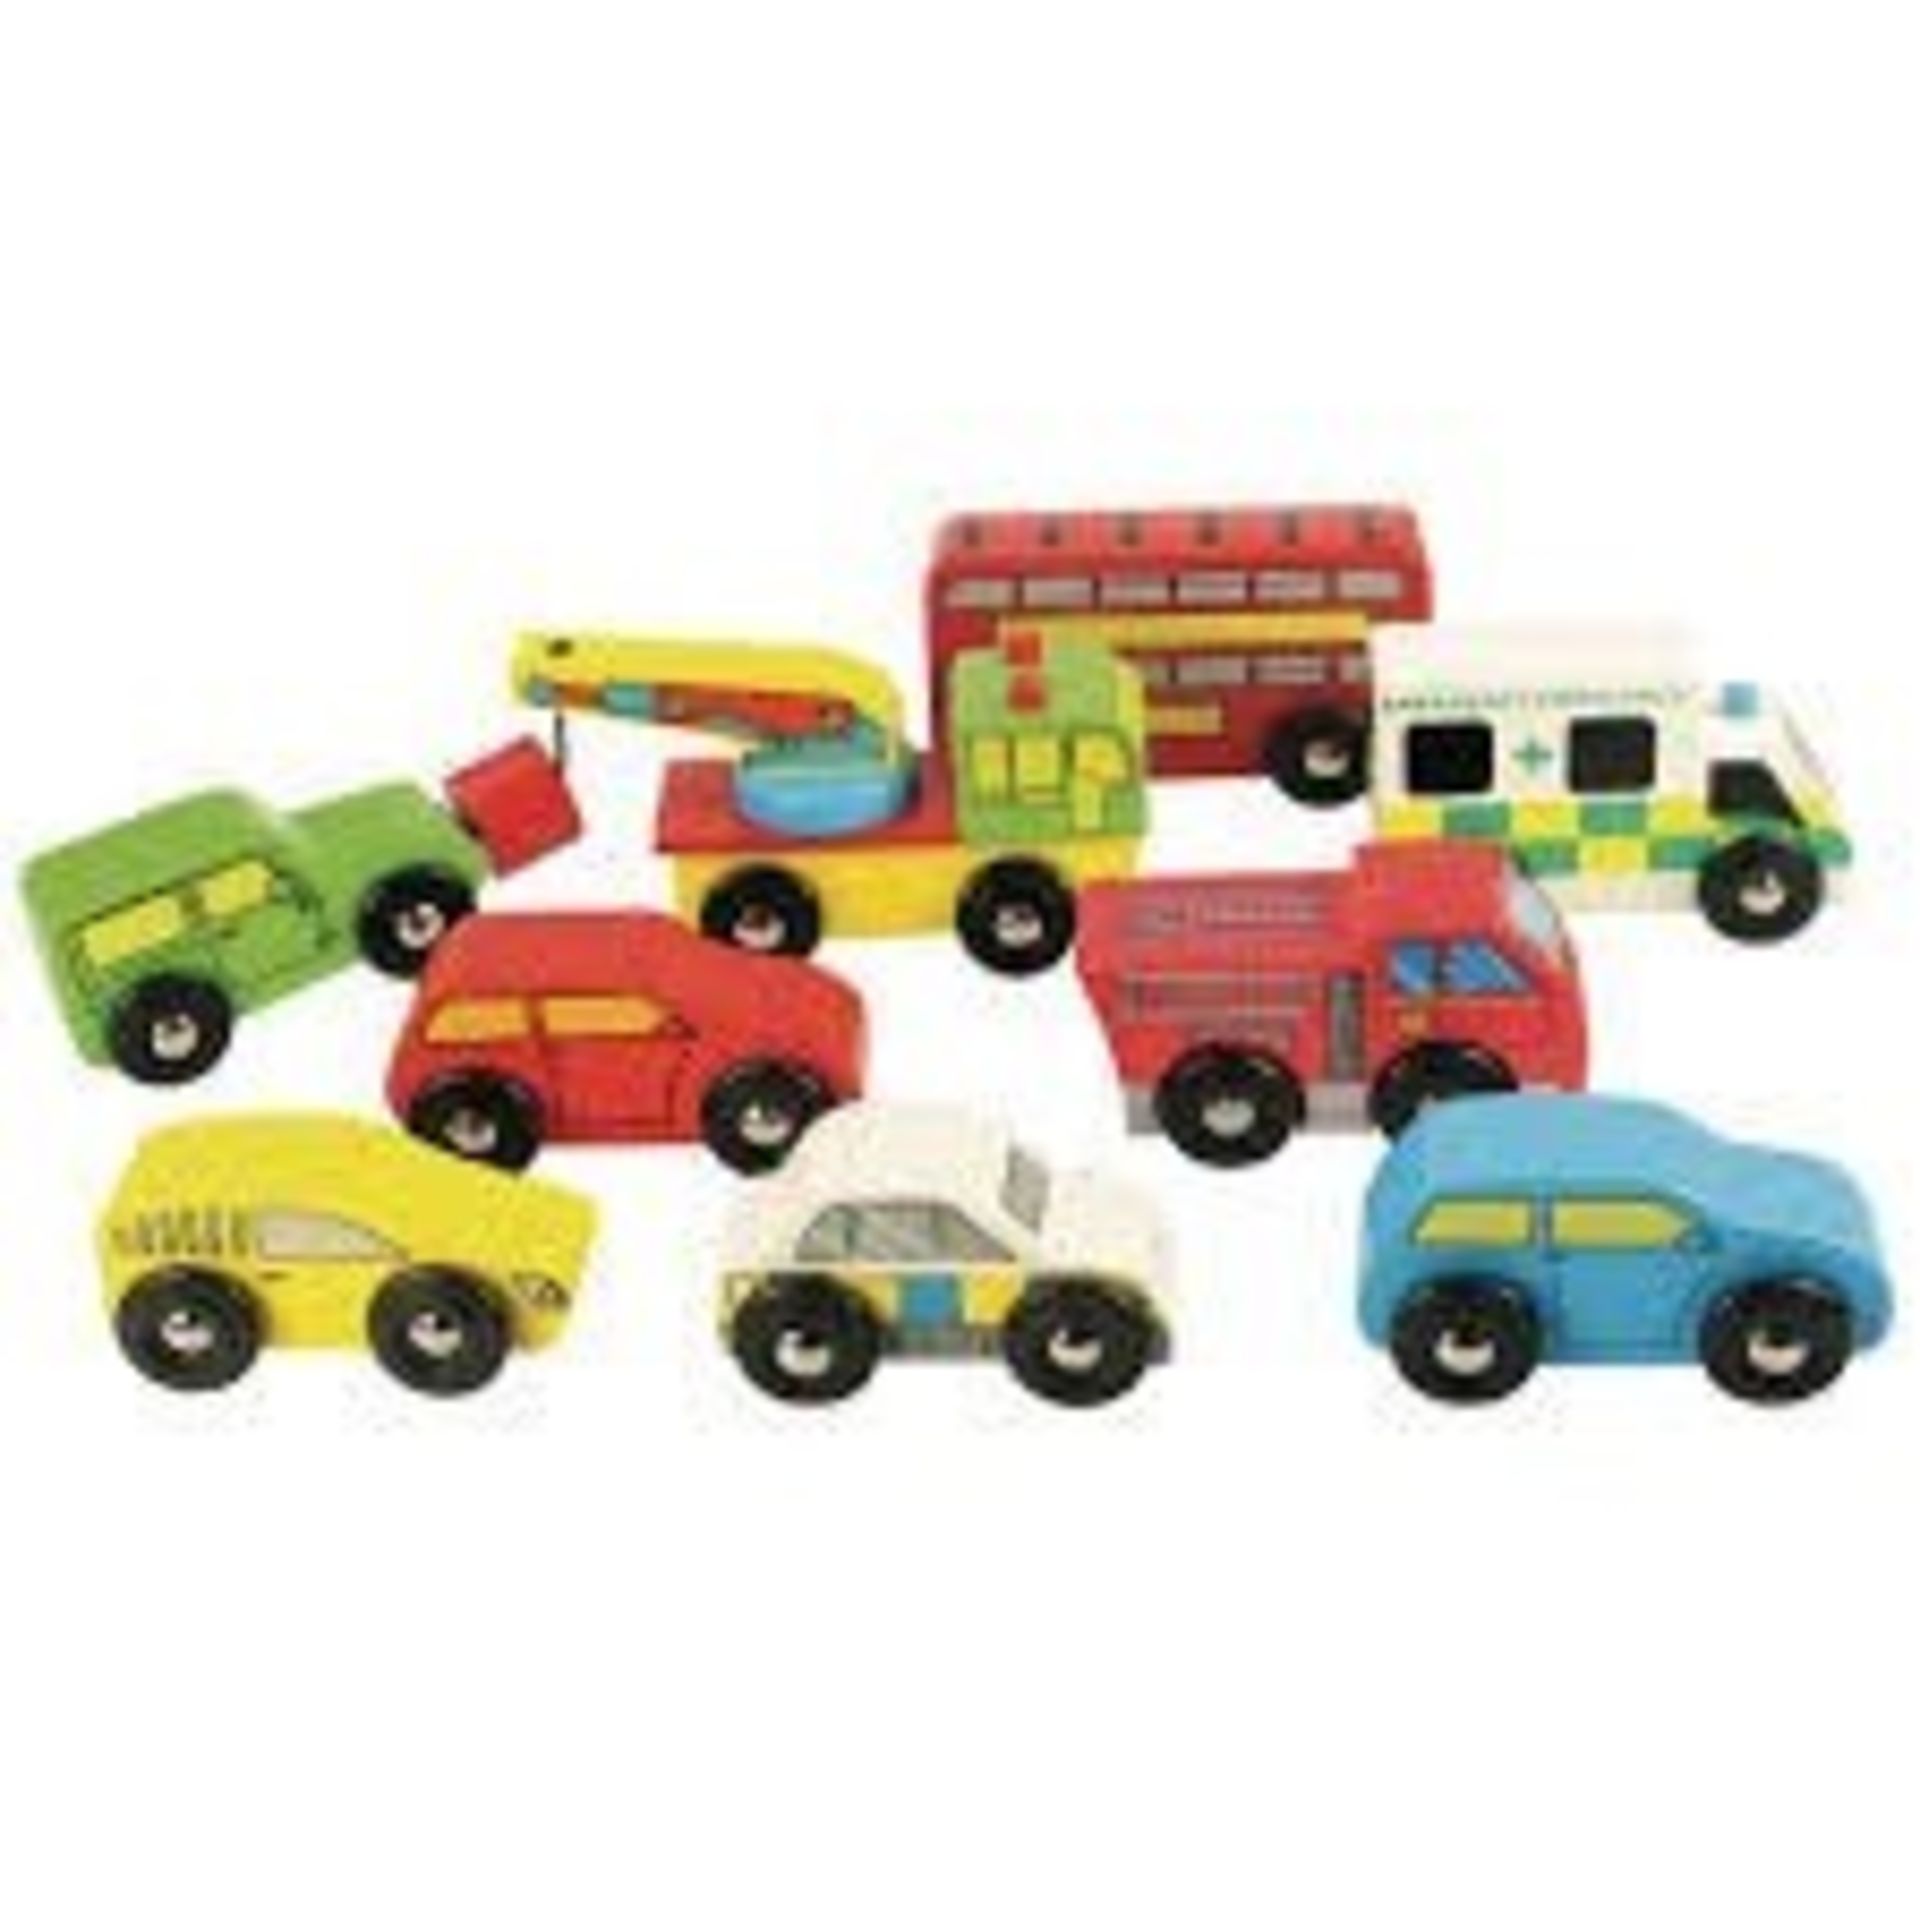 Boxed to Contain 6 Sets of 4 My First Emergency Vehicles Wooden Push Along Childrens Toys RRP £120